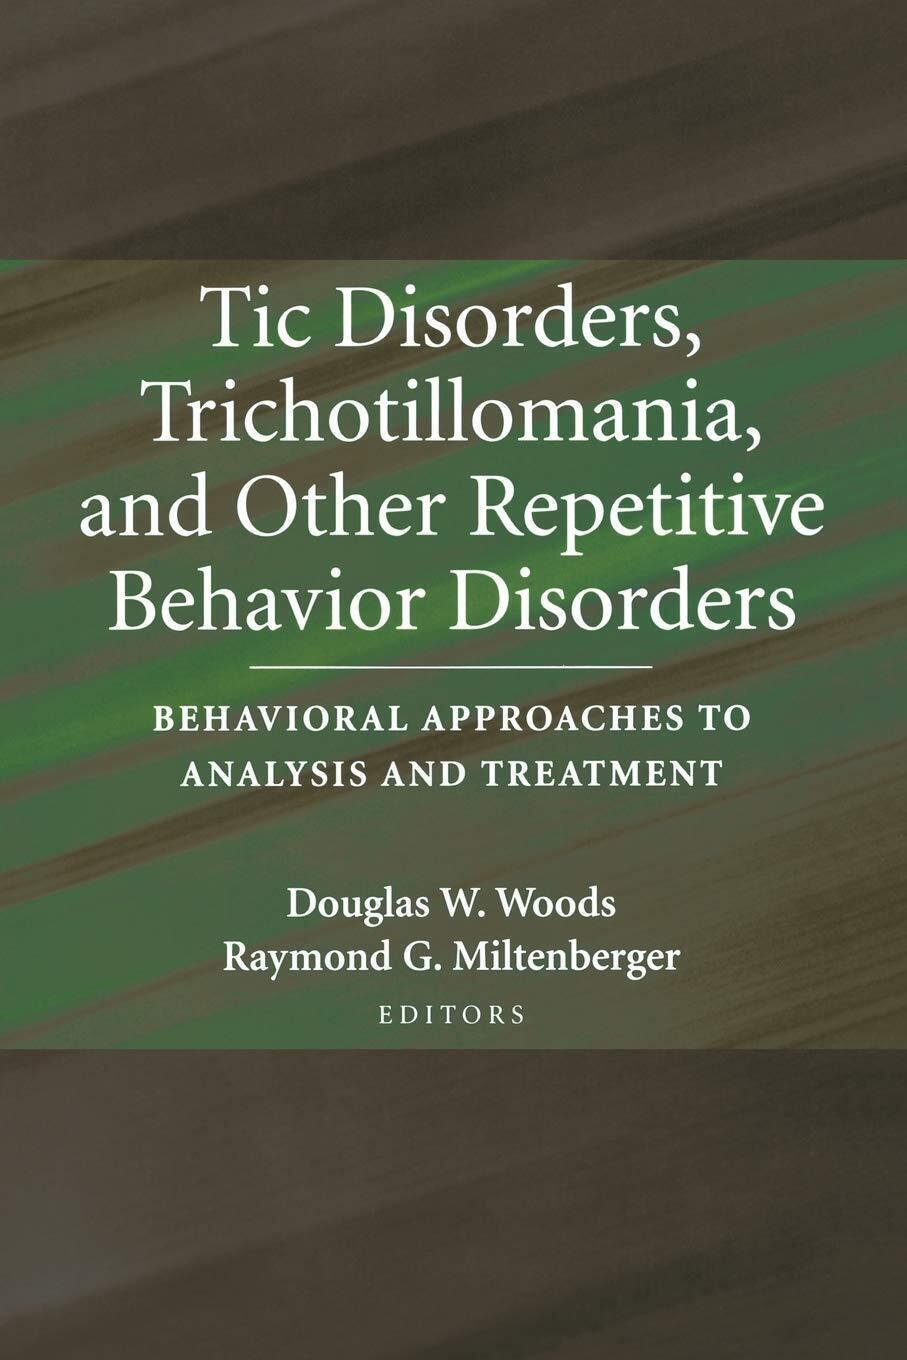 Tic Disorders, Trichotillomania, And Other Repetitive Behavior Disorders - 2006